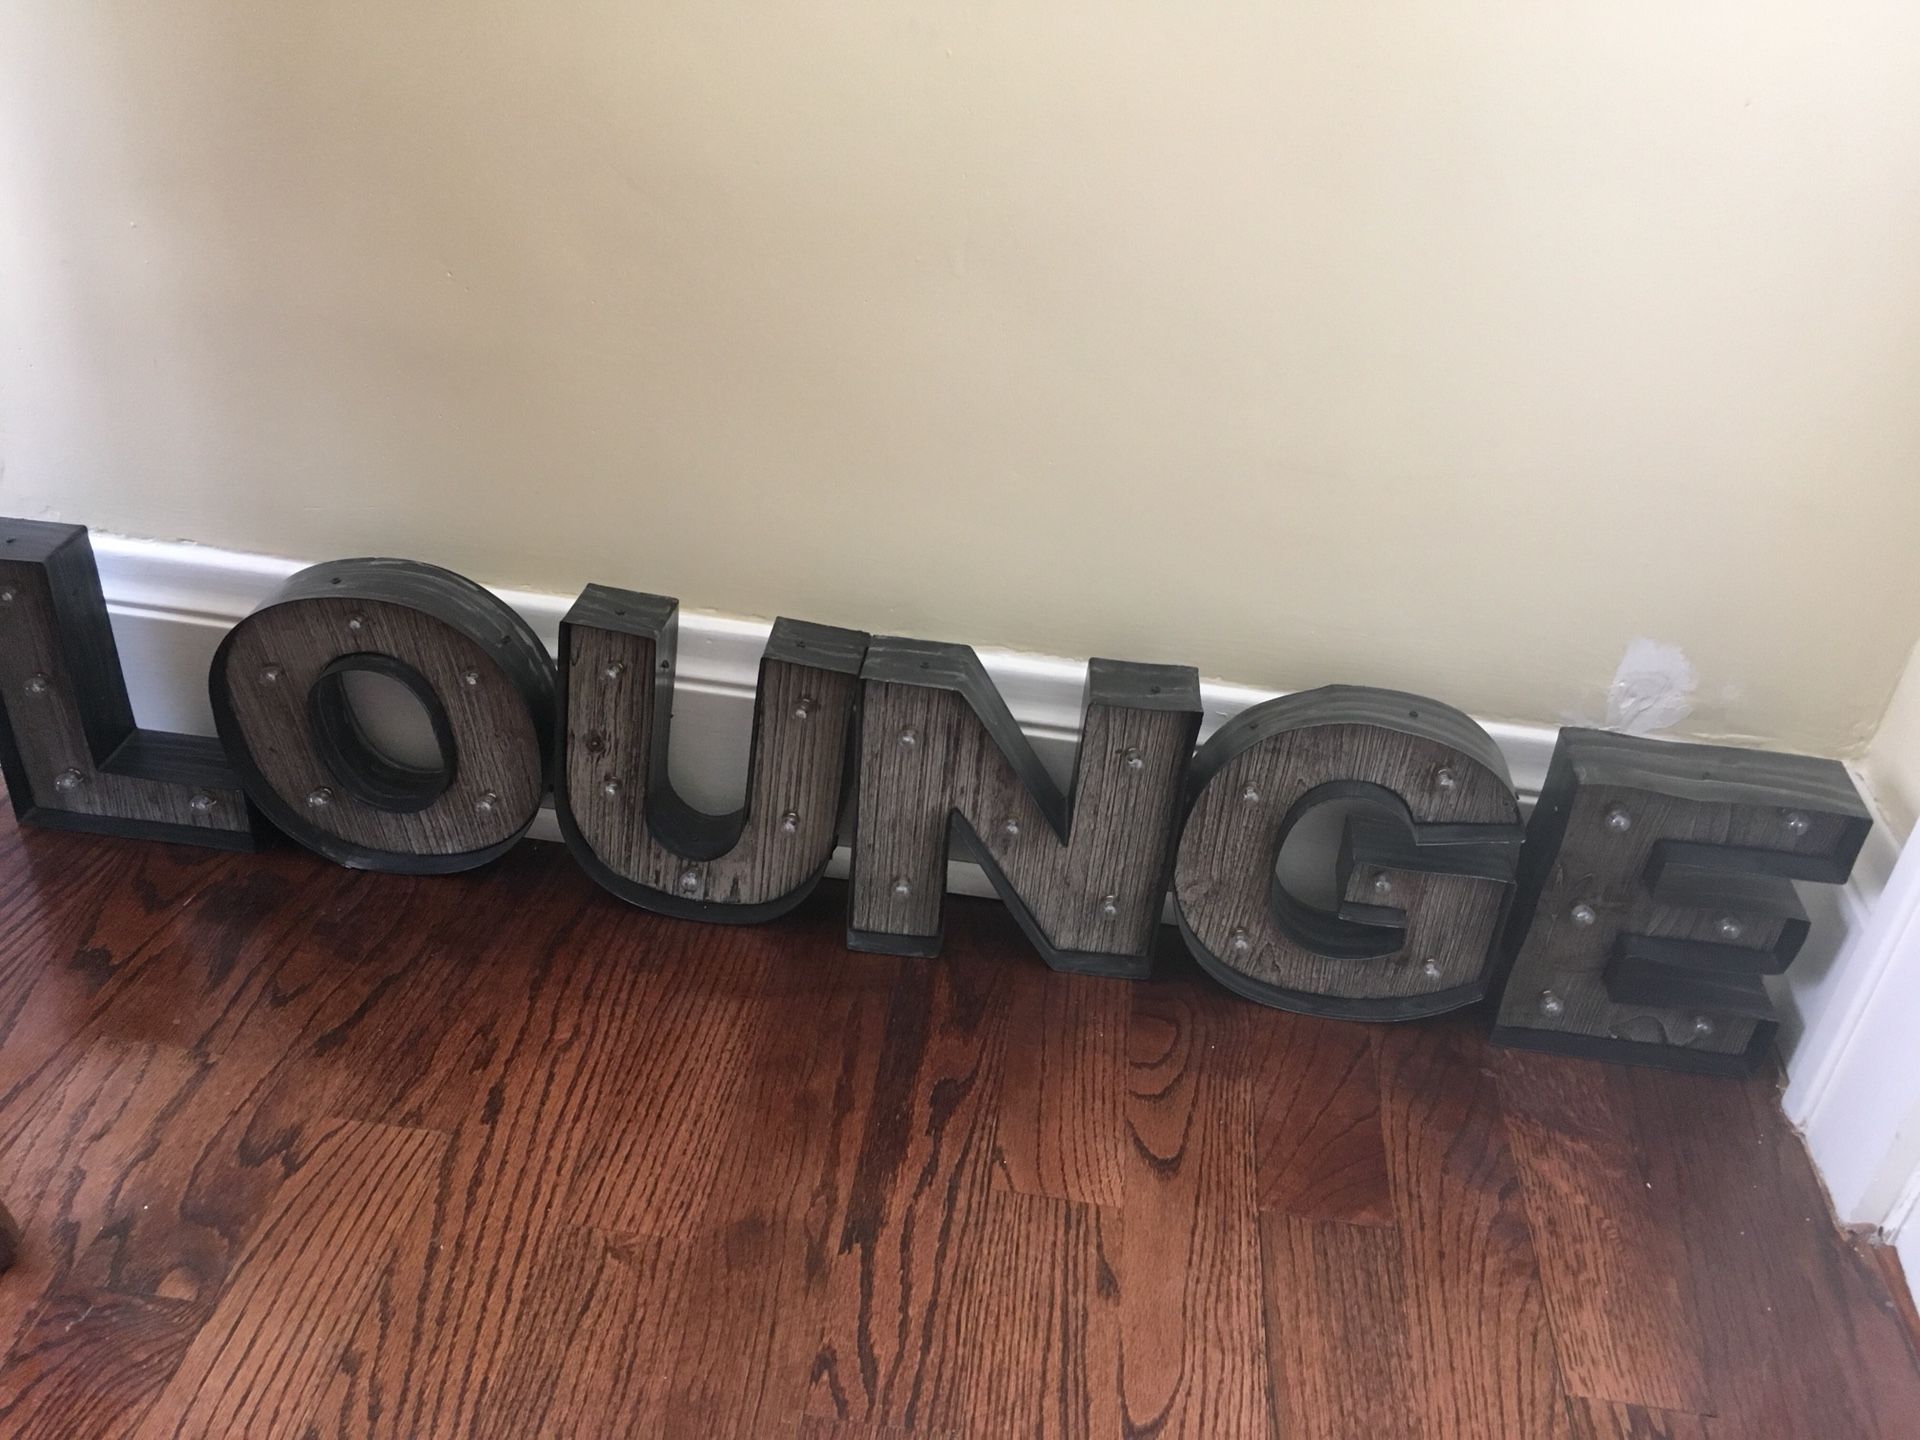 Marquee Alphabet Letters LOUNGE or NOEL